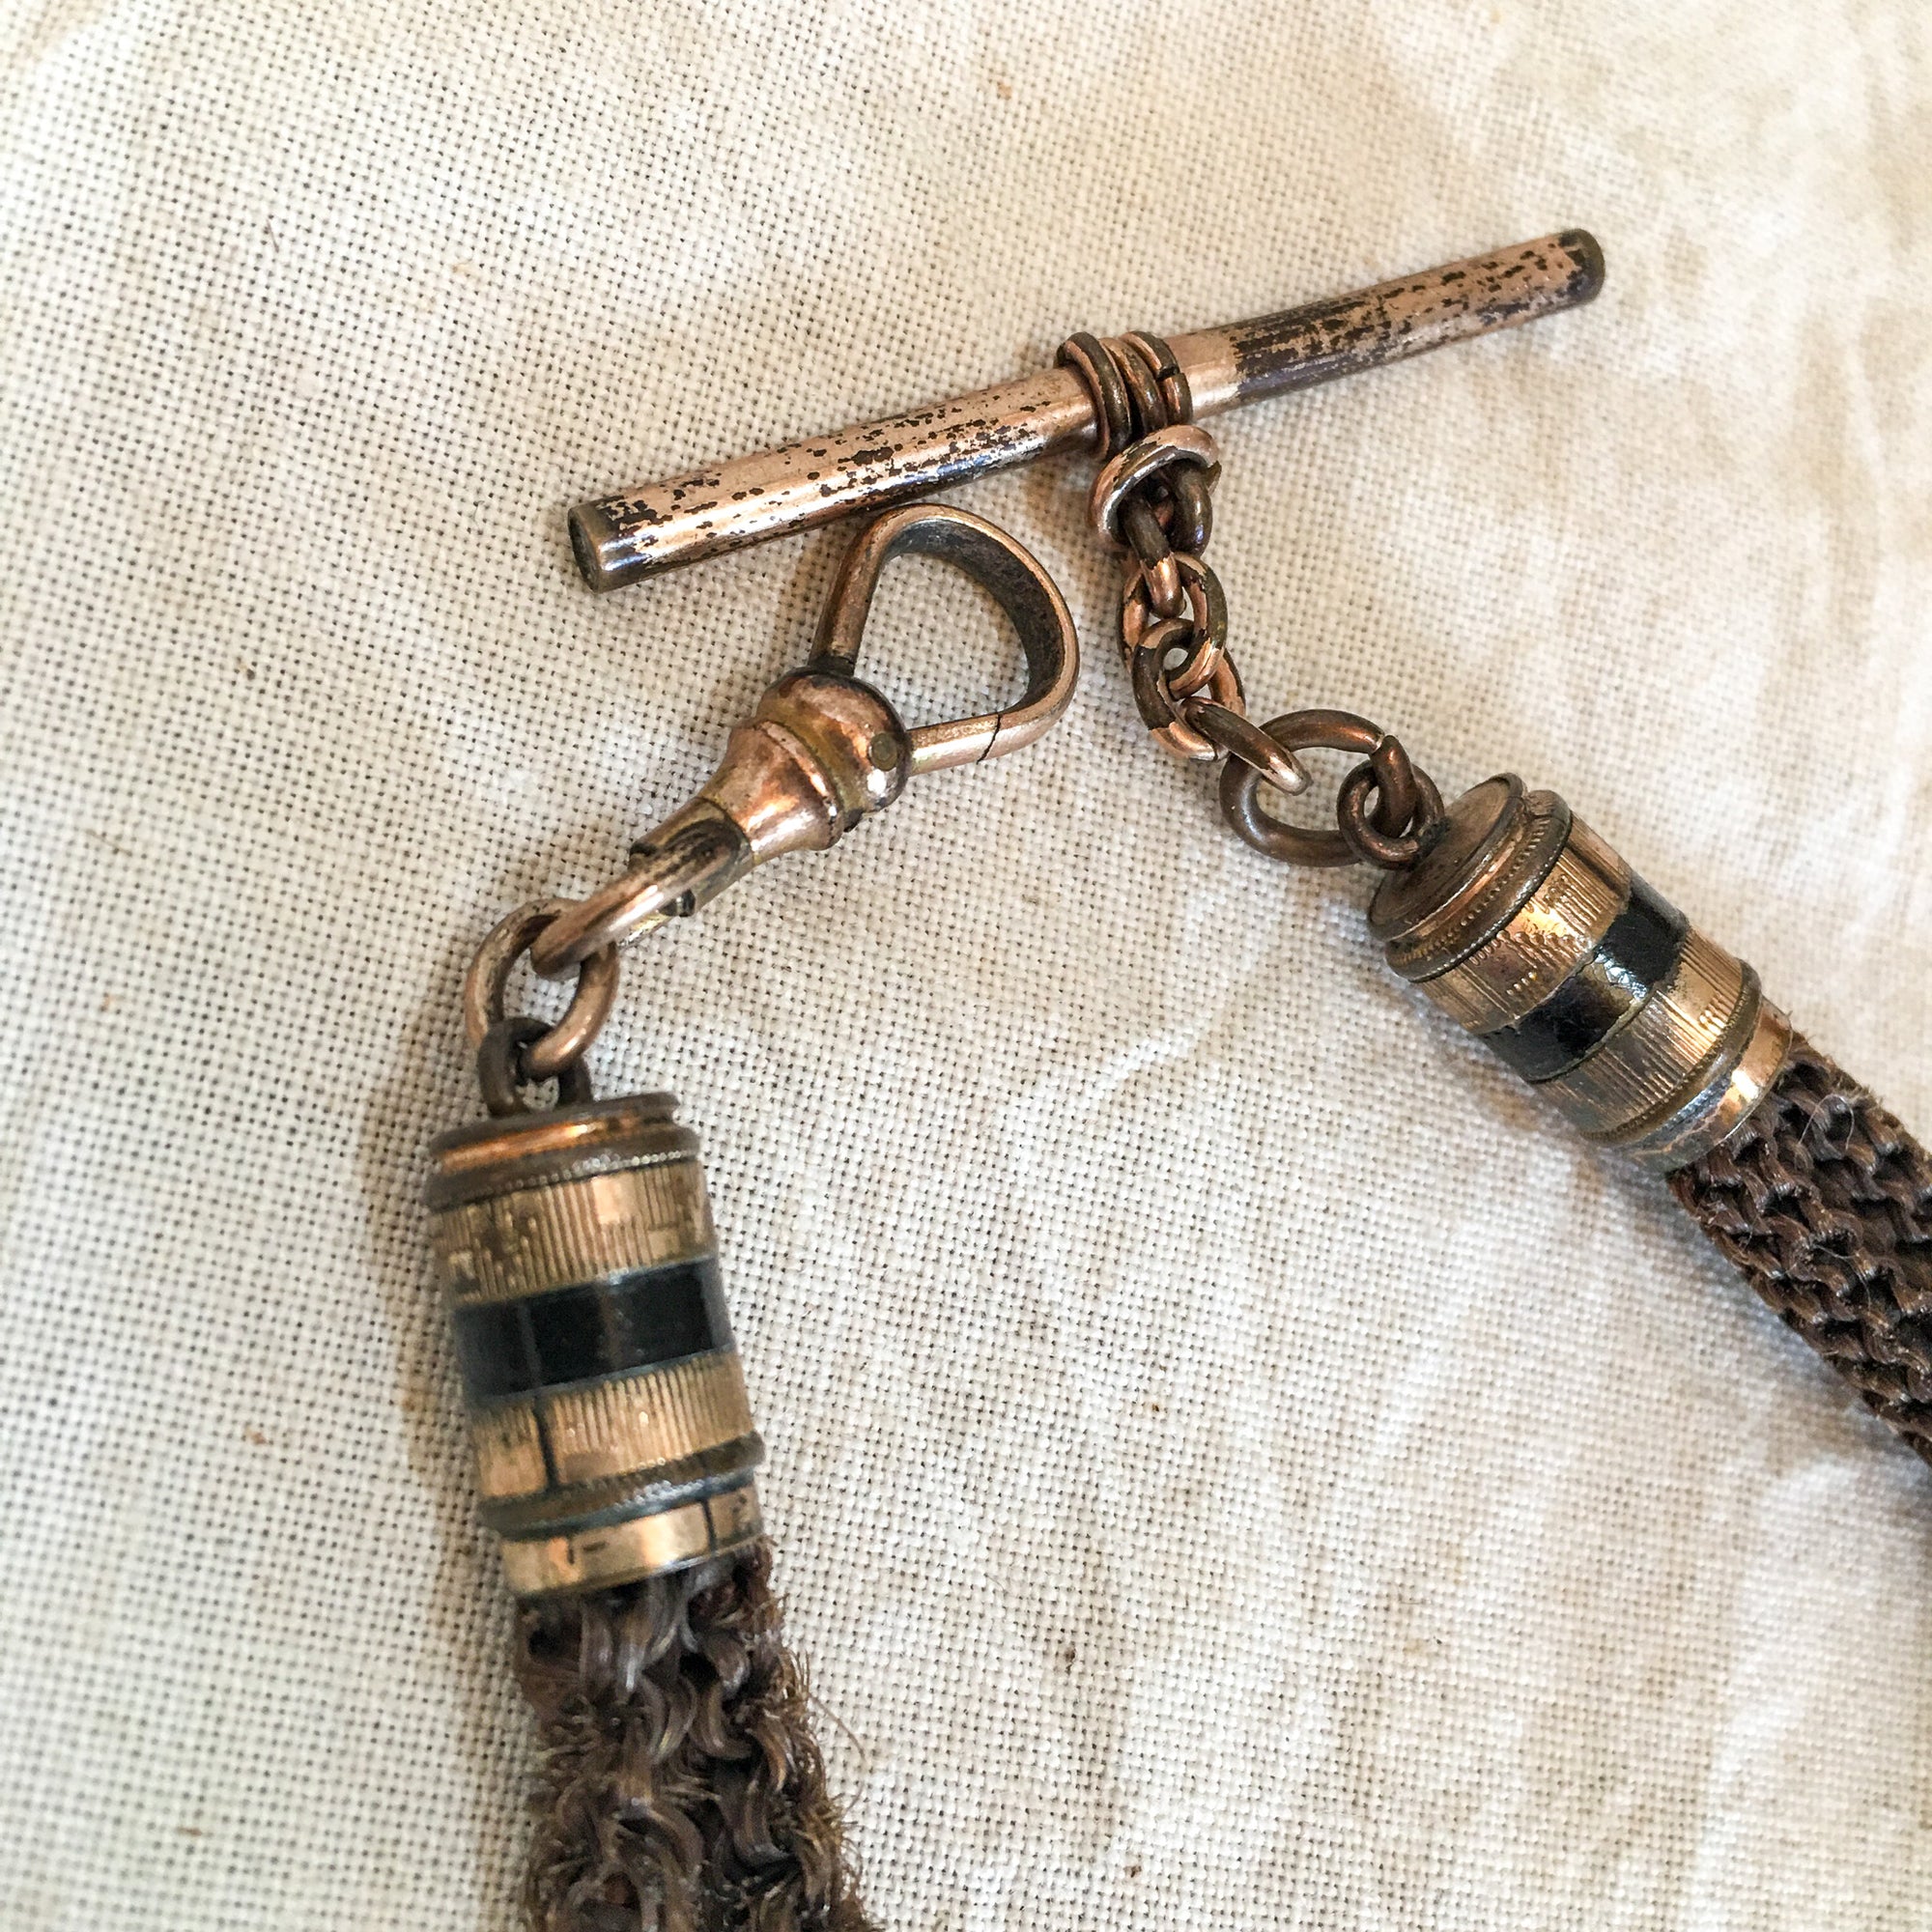 Victorian Era Woven Hair Jewelry, Watch Fob with Gold Plated Accents and Polished Stone or Glass Bead